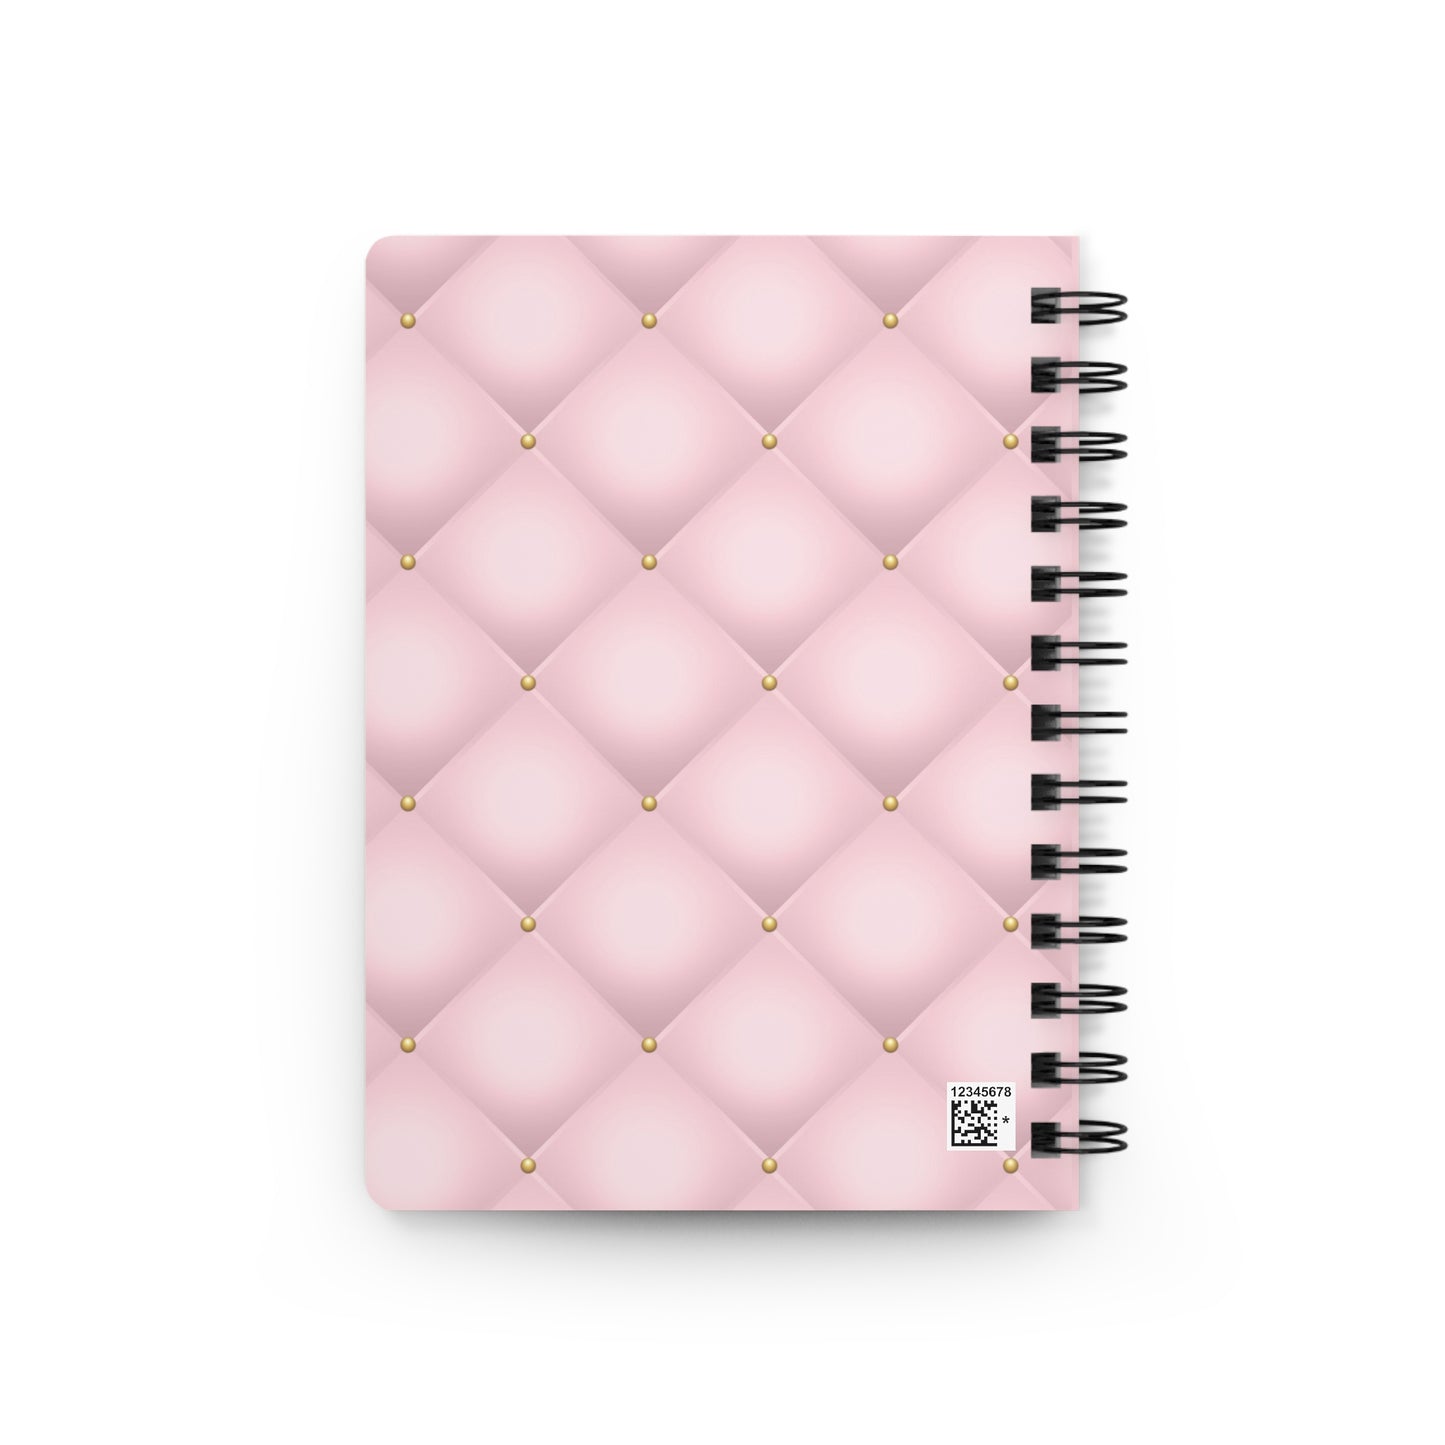 Stop for one minute Tufted Print Light Pink and Gold Spiral Bound Journal